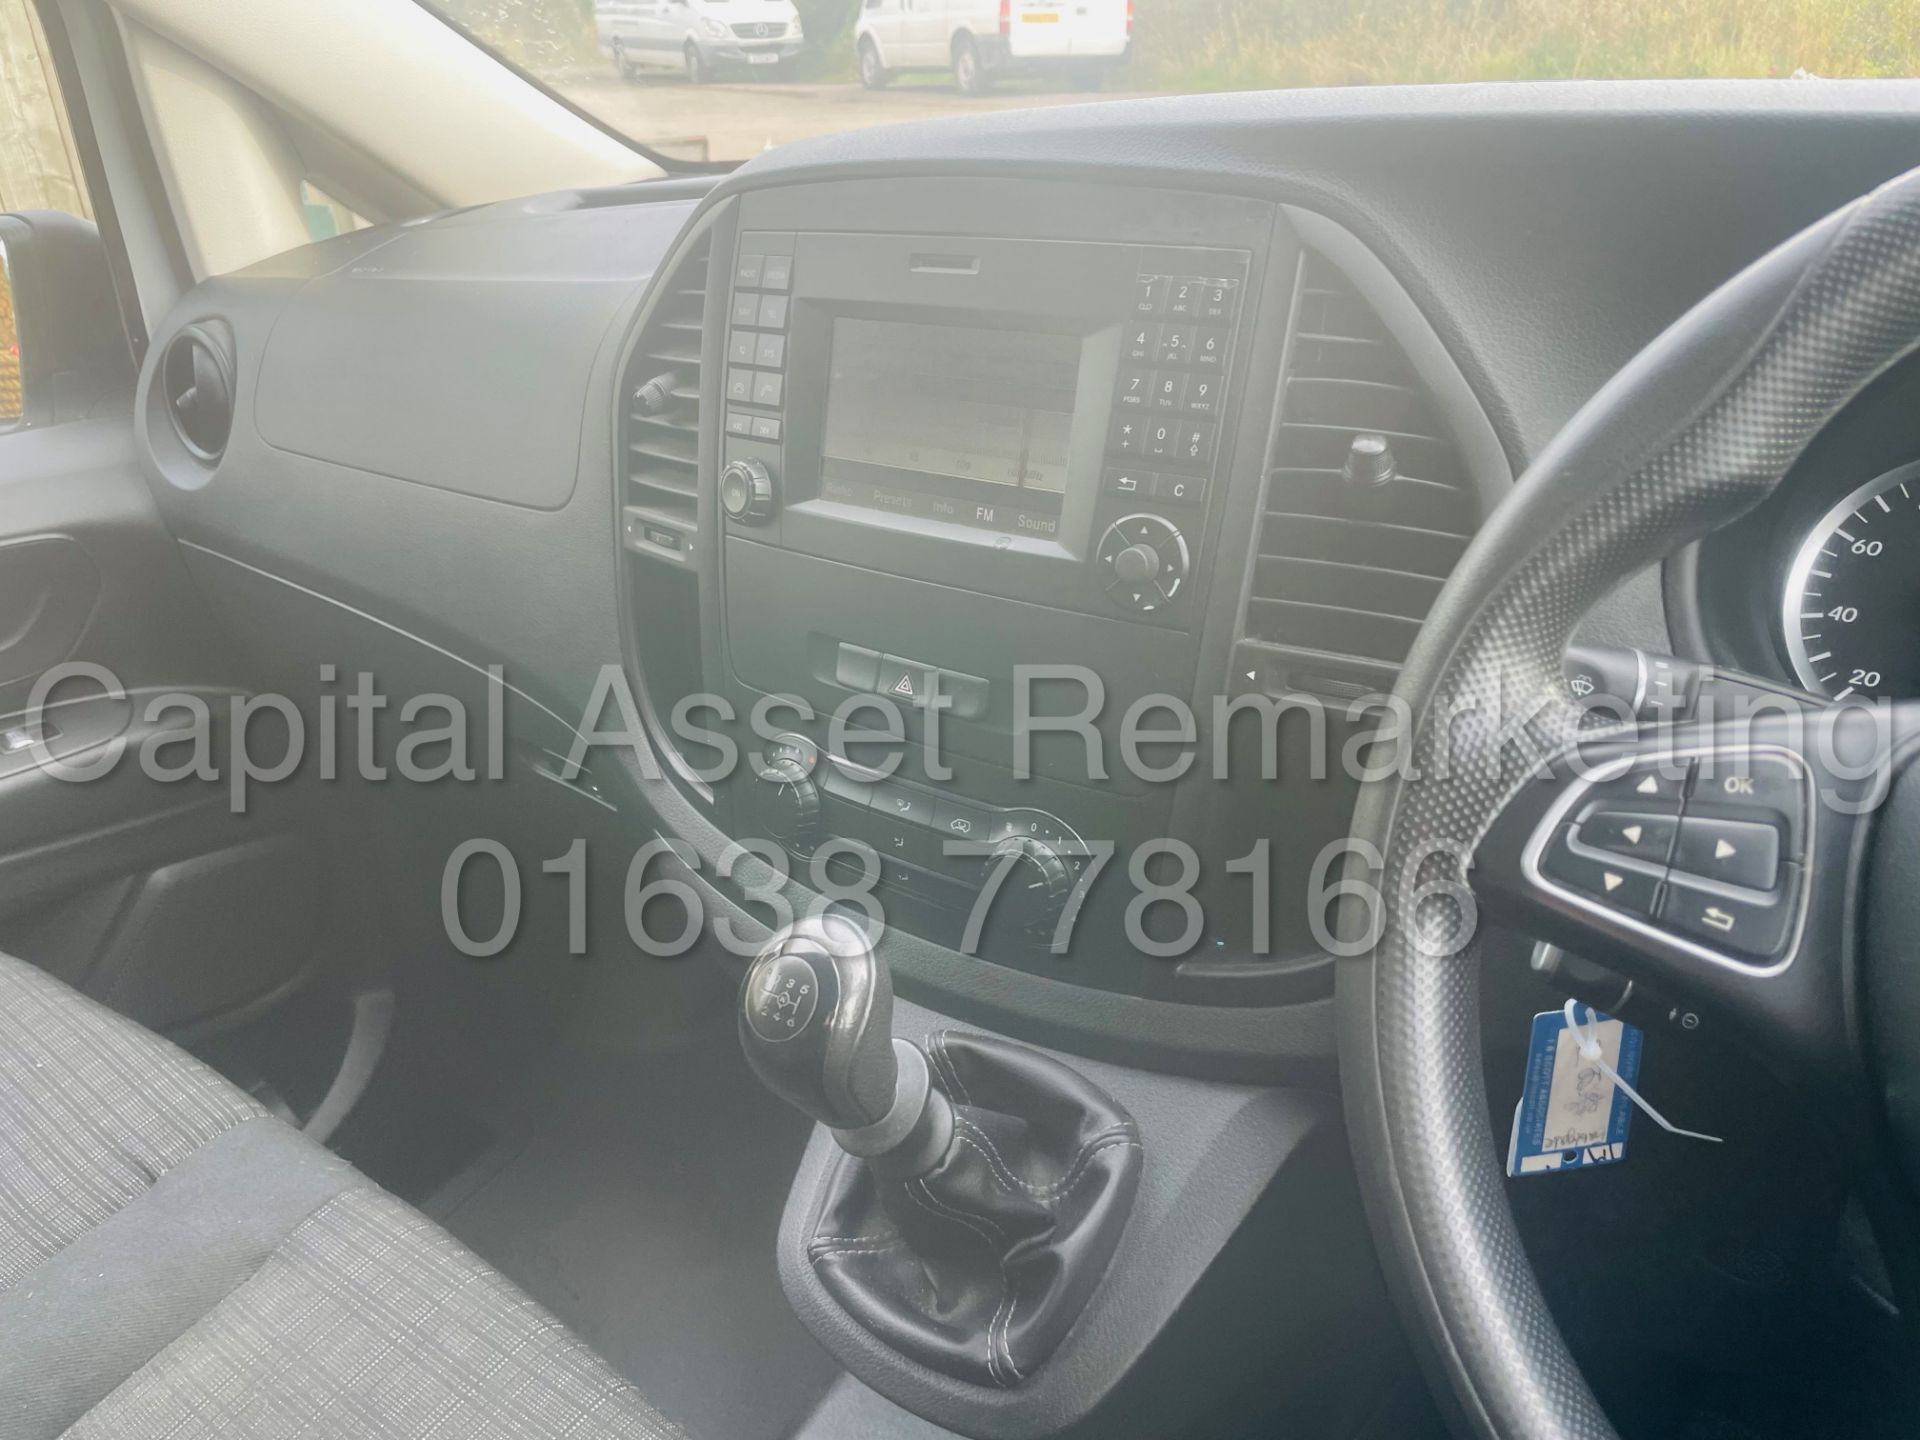 ON SALE MERCEDES-BENZ VITO CDI *LWB - PANEL VAN* (2018 - EURO 6) '6 SPEED - CRUISE CONTROL (1 OWNER) - Image 35 of 43